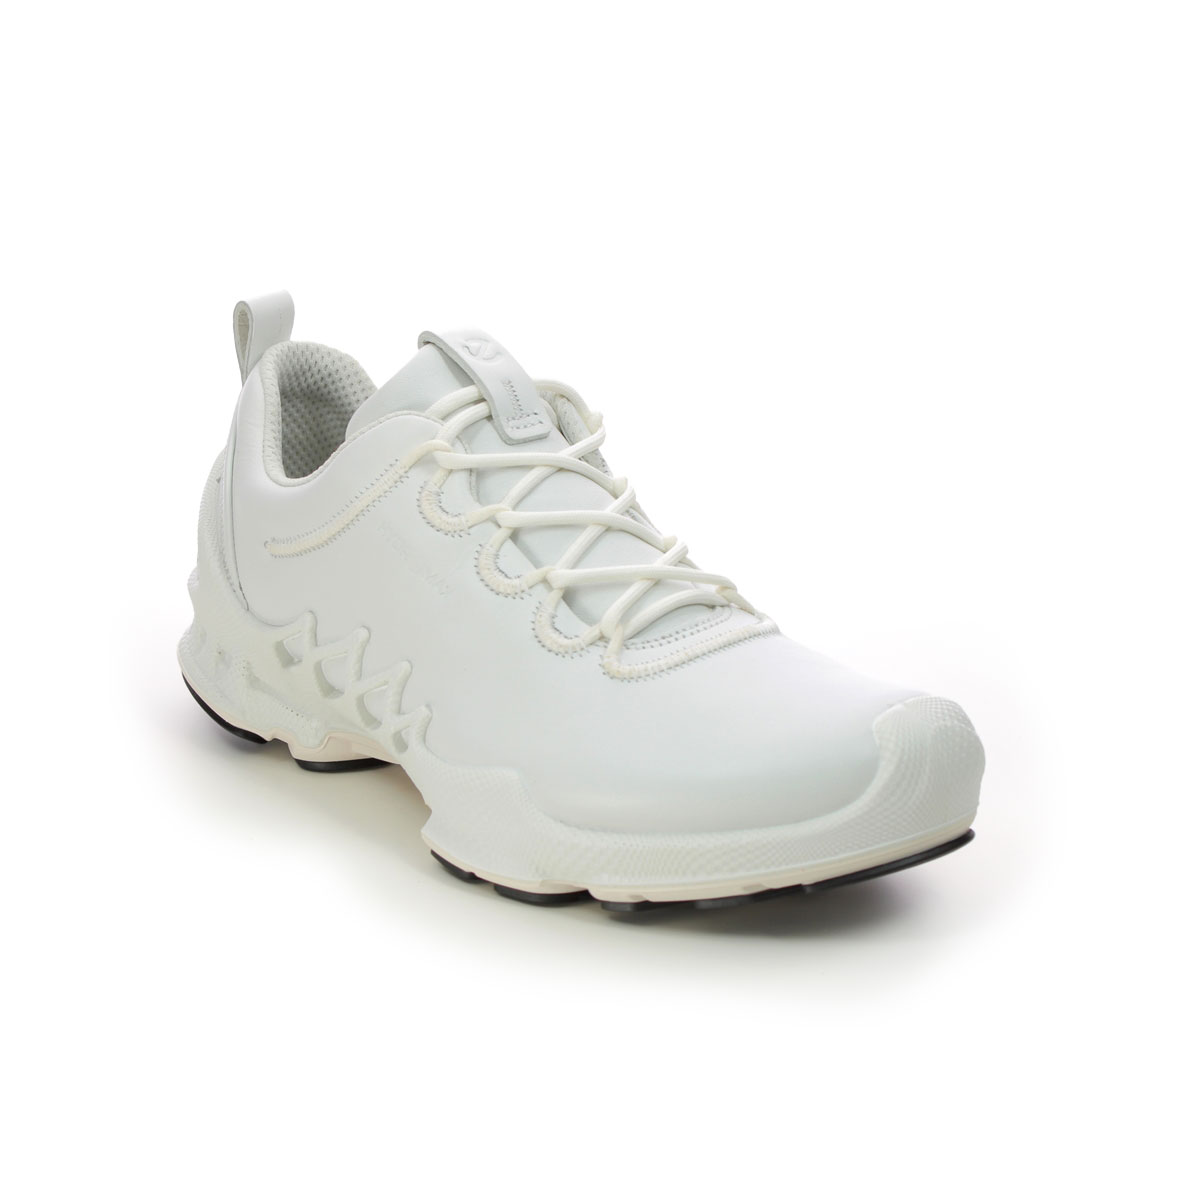 Ecco Biom Aex Hydromax White Leather Womens Trainers 802833-01007 In Size 38 In Plain White Leather